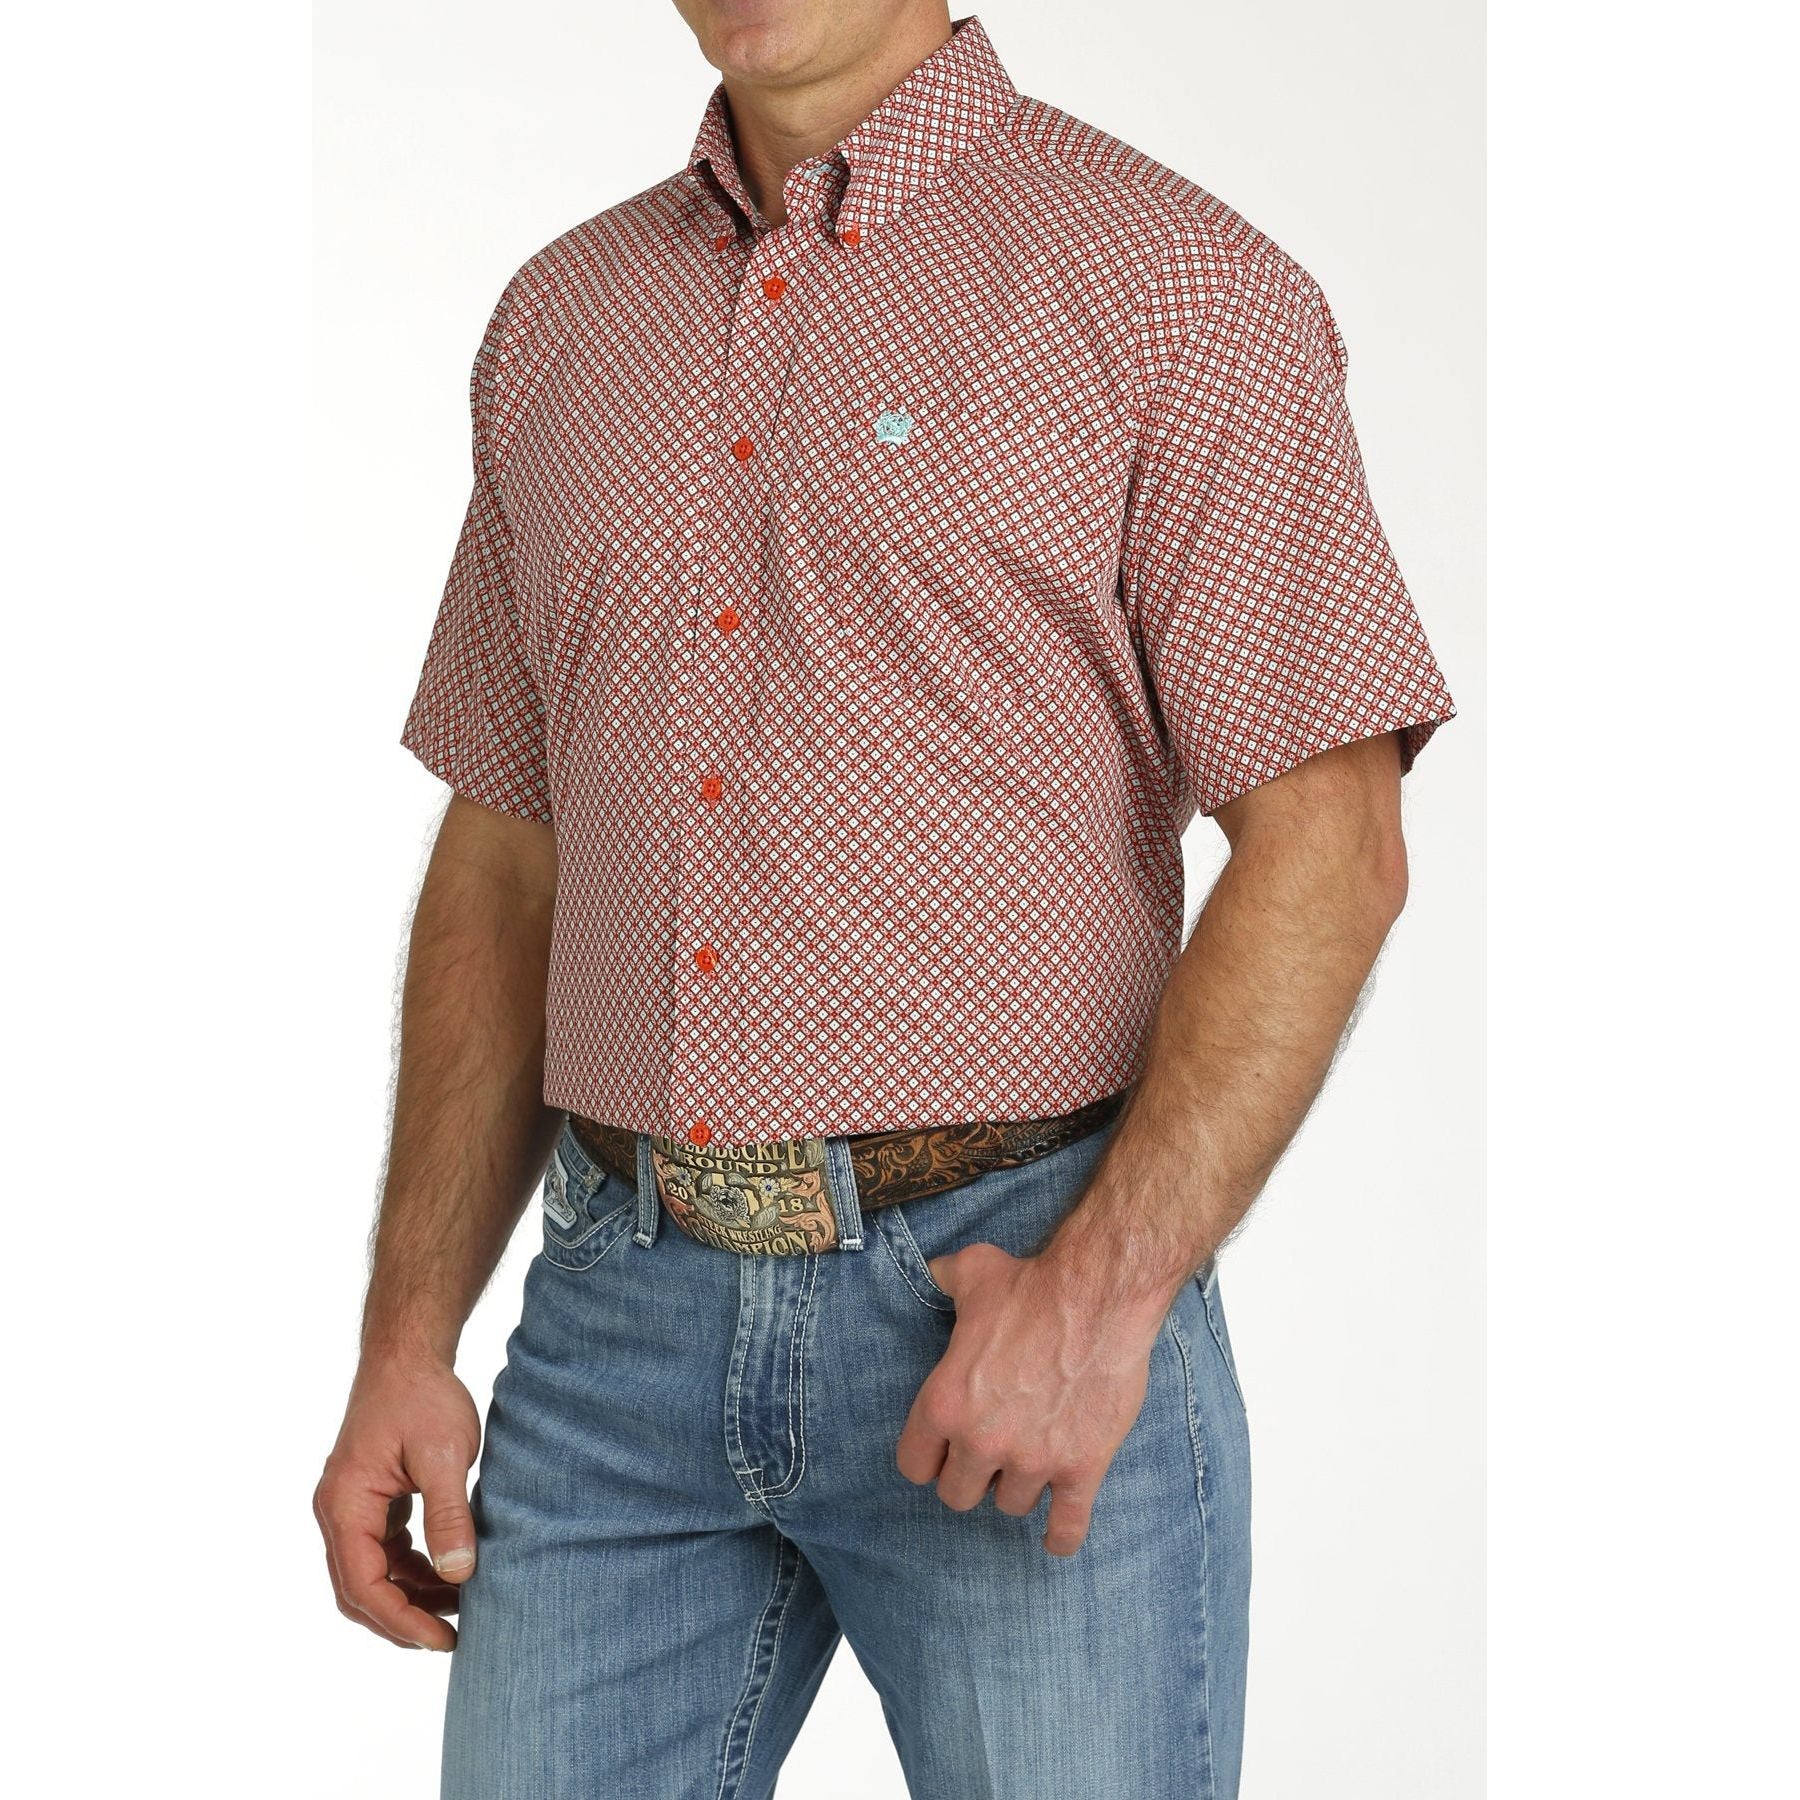 MEN'S CINCH GEOMETRIC PRINT BUTTON-DOWN SHORT SLEEVE WESTERN SHIRT - RED / TURQUOISE